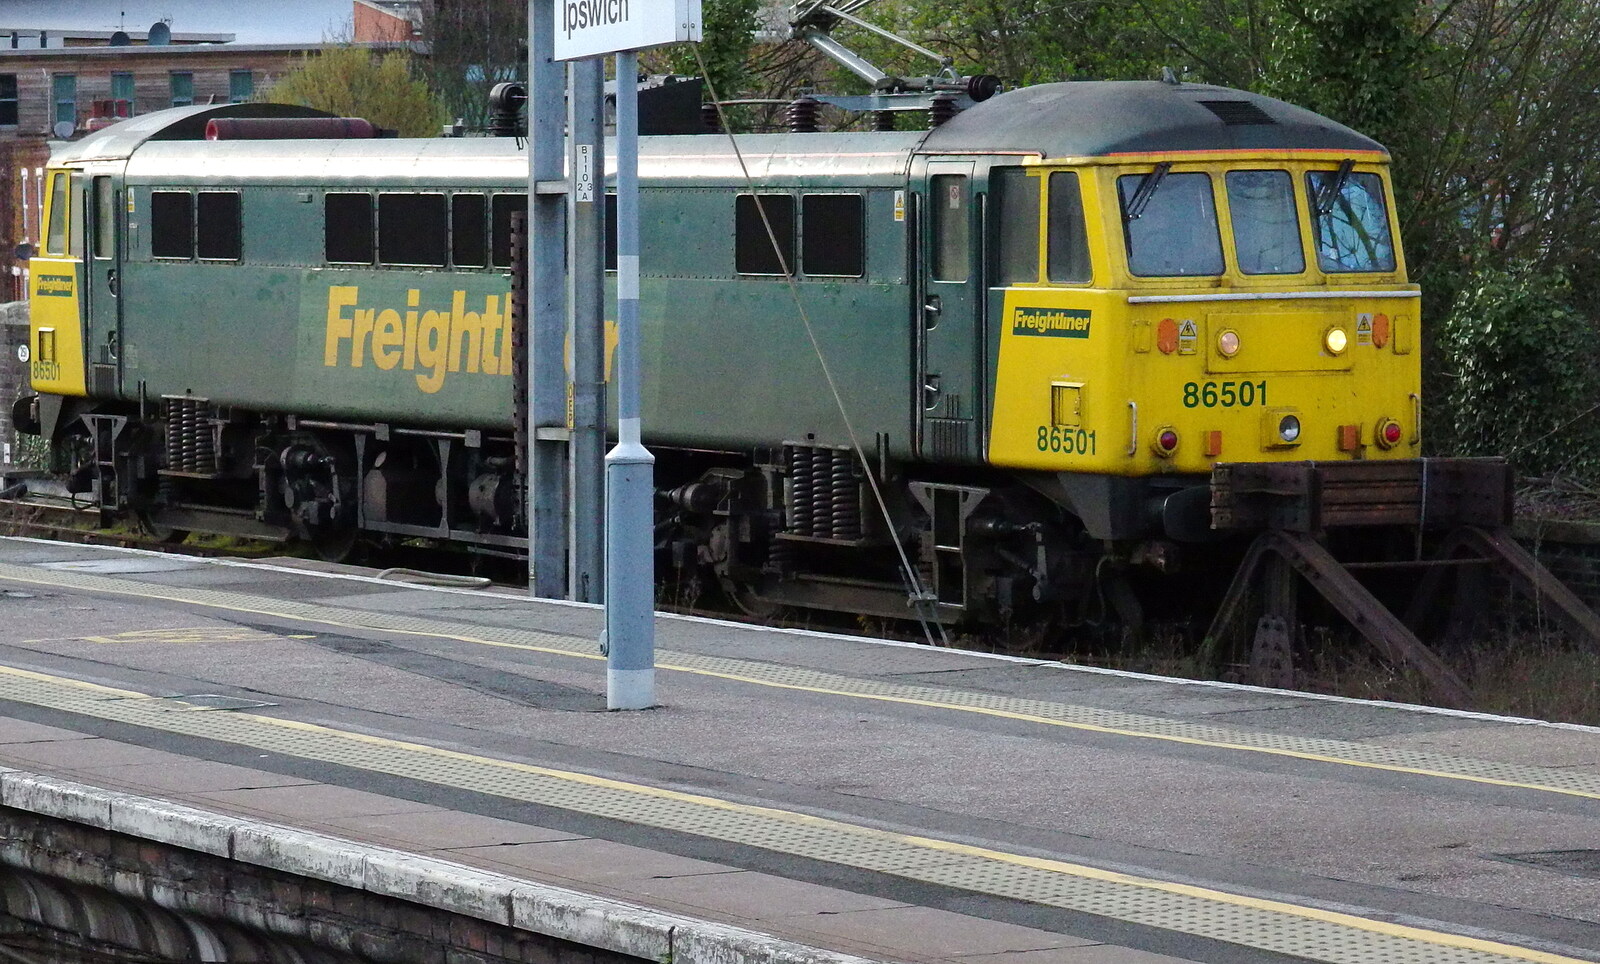 At Ipswich, Class 86 loco 86501, built in 1966 from A Trainey Sort of Week, Liverpool Street, City of London - 3rd April 2014